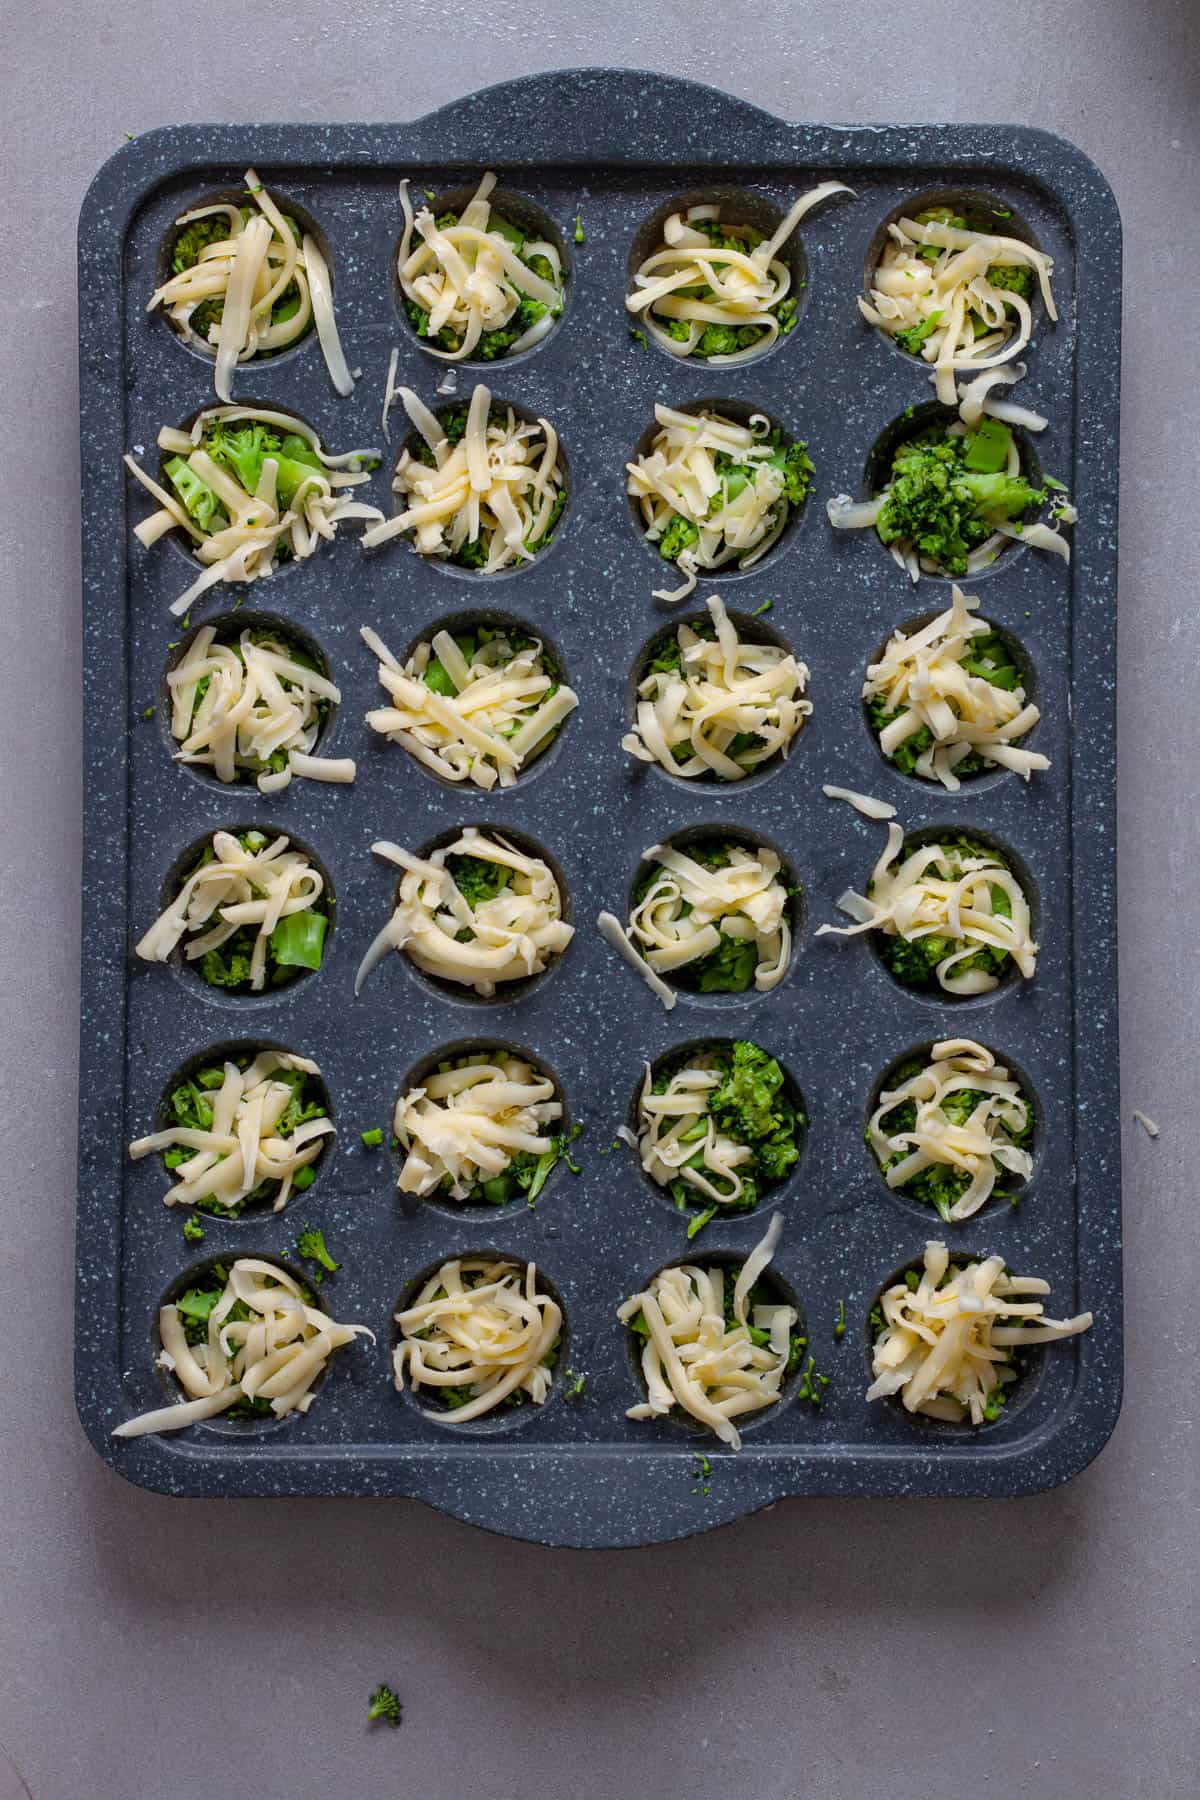 A mini muffin pan with shredded cheese and chopped broccoli.